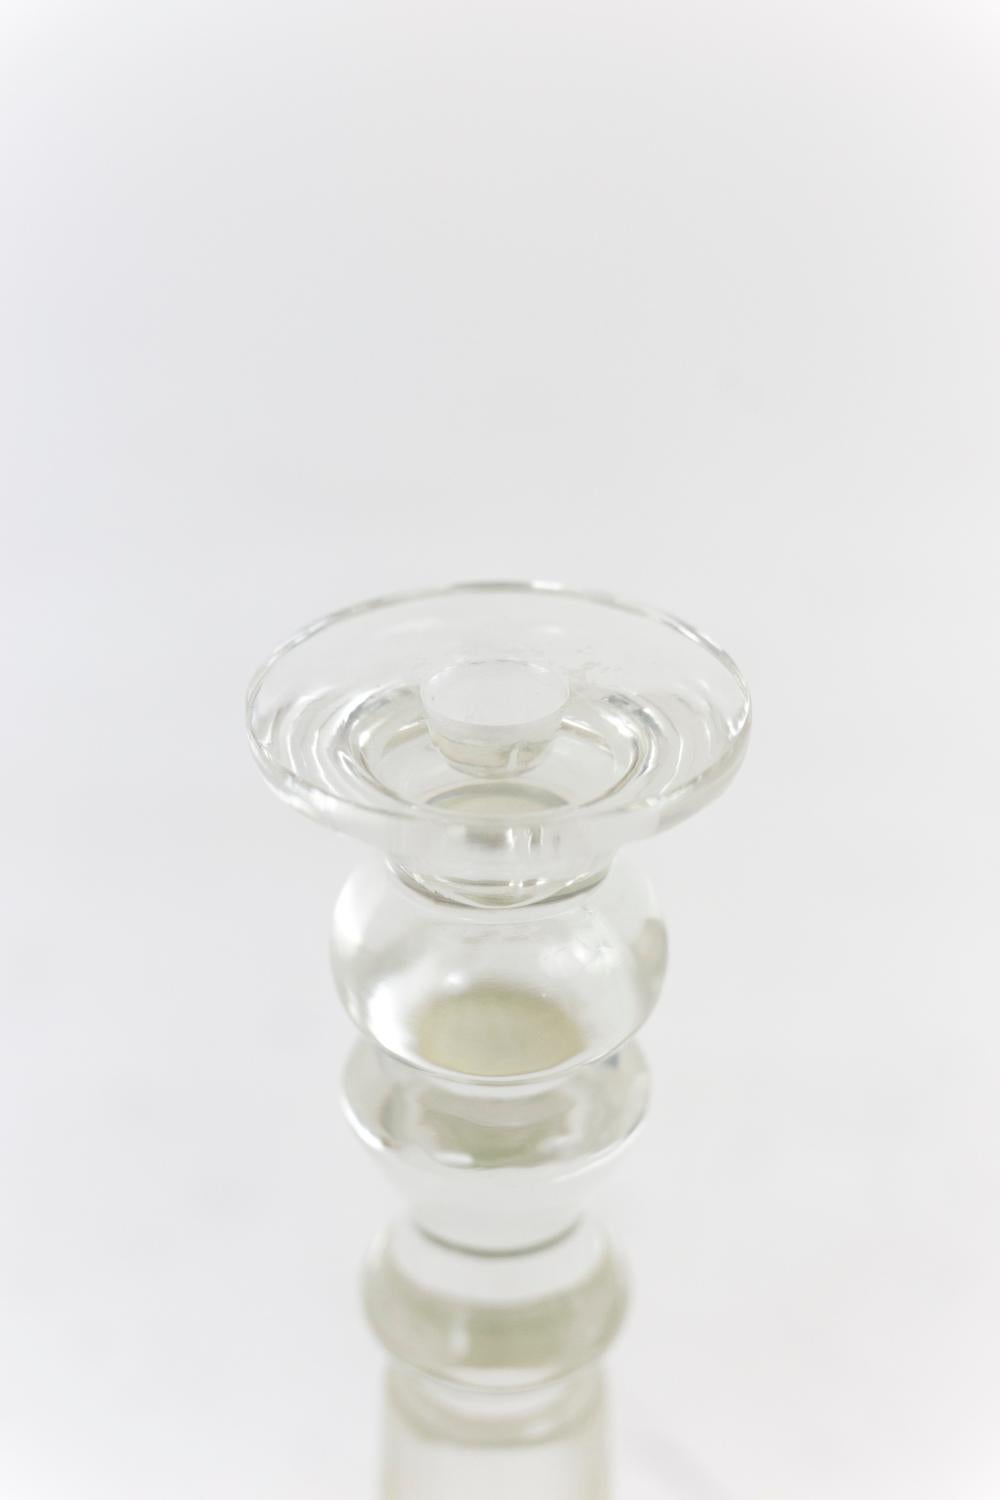 Louis Philippe Pair of Candleholders in Crystal, Louis-Philippe Period For Sale